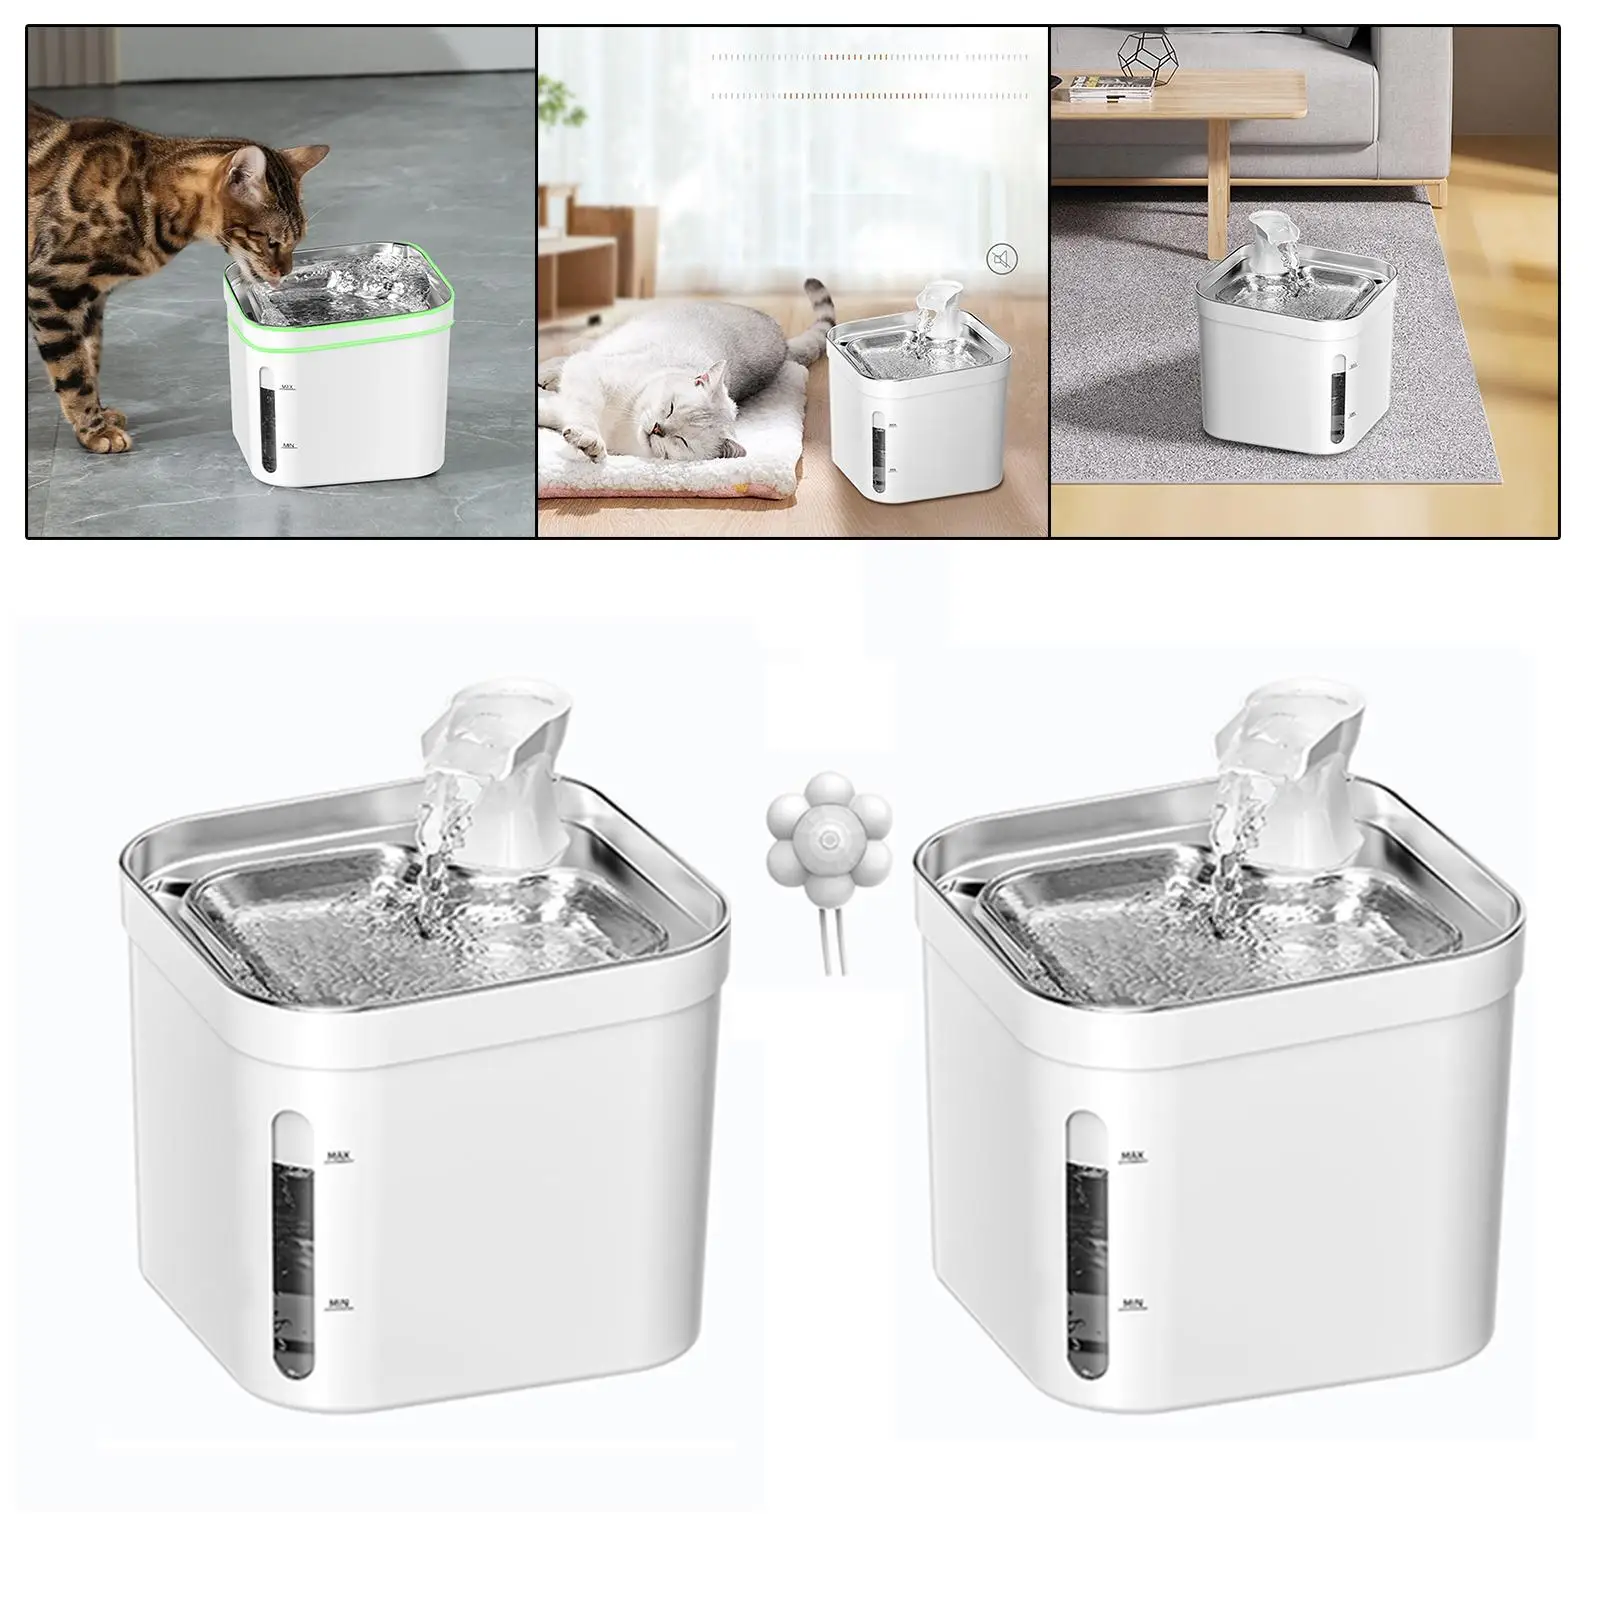 Automatic Cat Water Fountain Quiet Feeding Bowl 2.2L for Dogs Puppy Cats